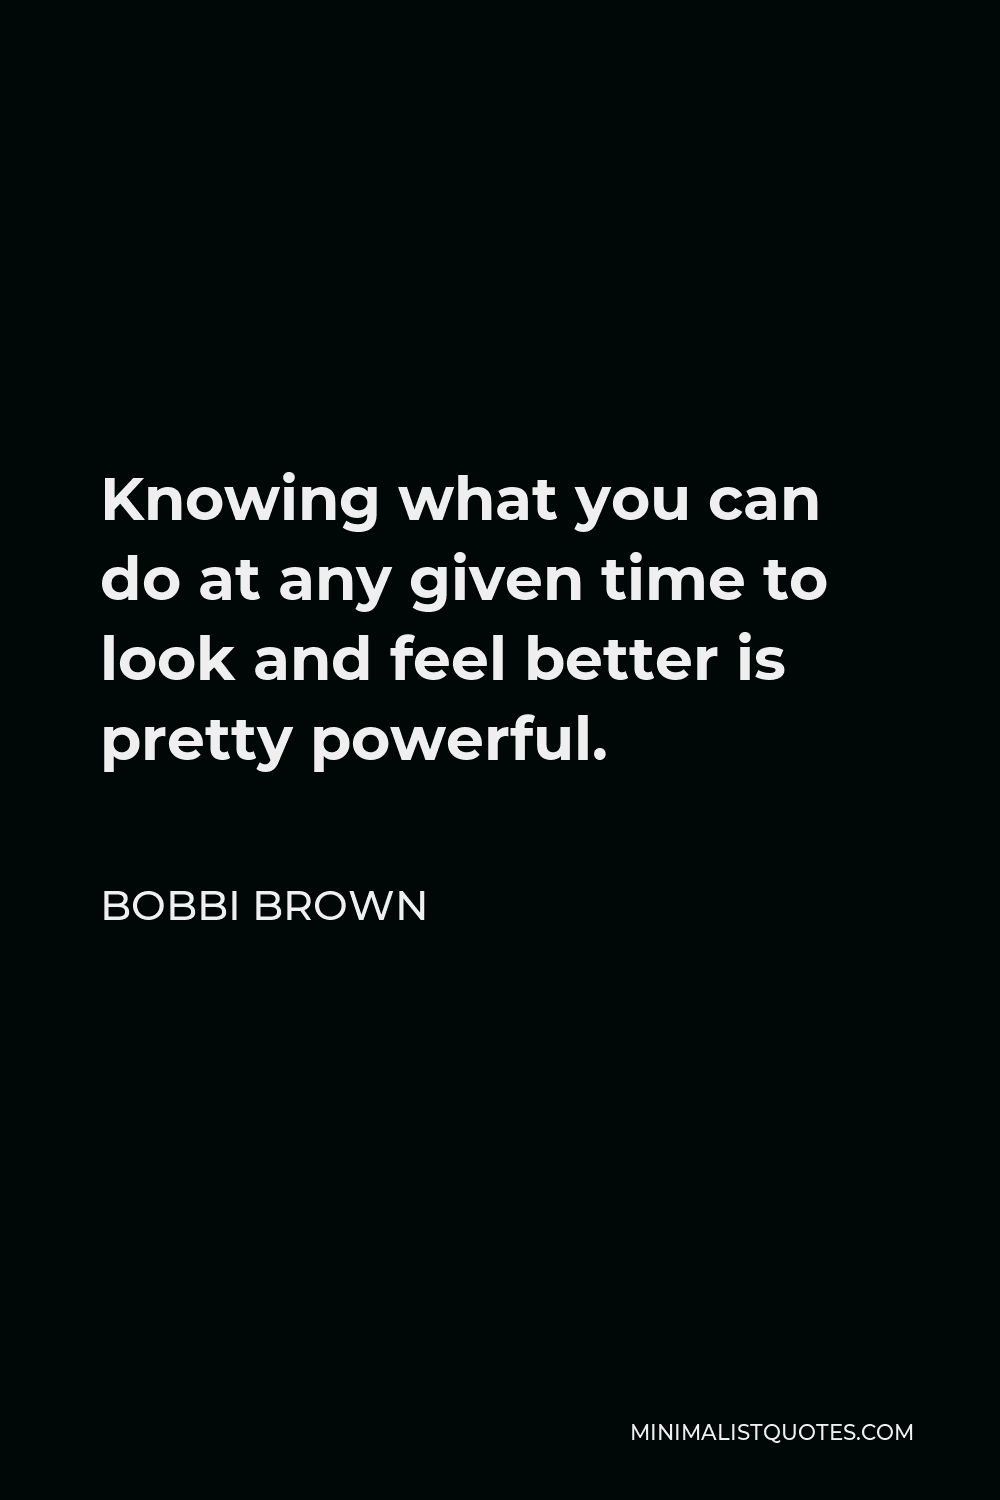 Bobbi Brown Quote - Knowing what you can do at any given time to look and feel better is pretty powerful.